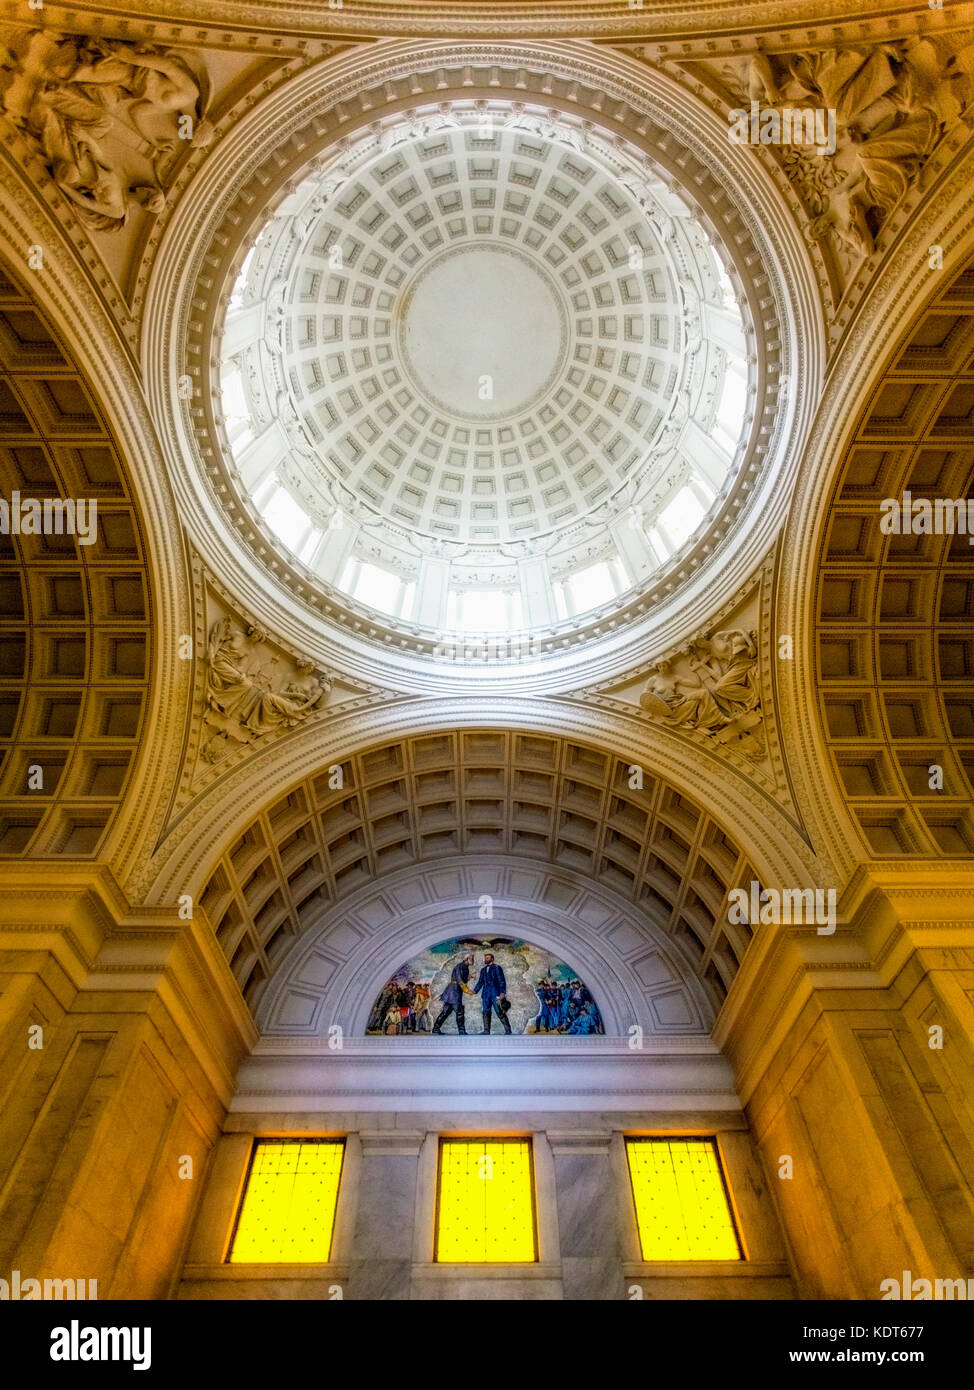 Interior View of Domed Ceiling in Grant's Tomb in New York City Stock Photo